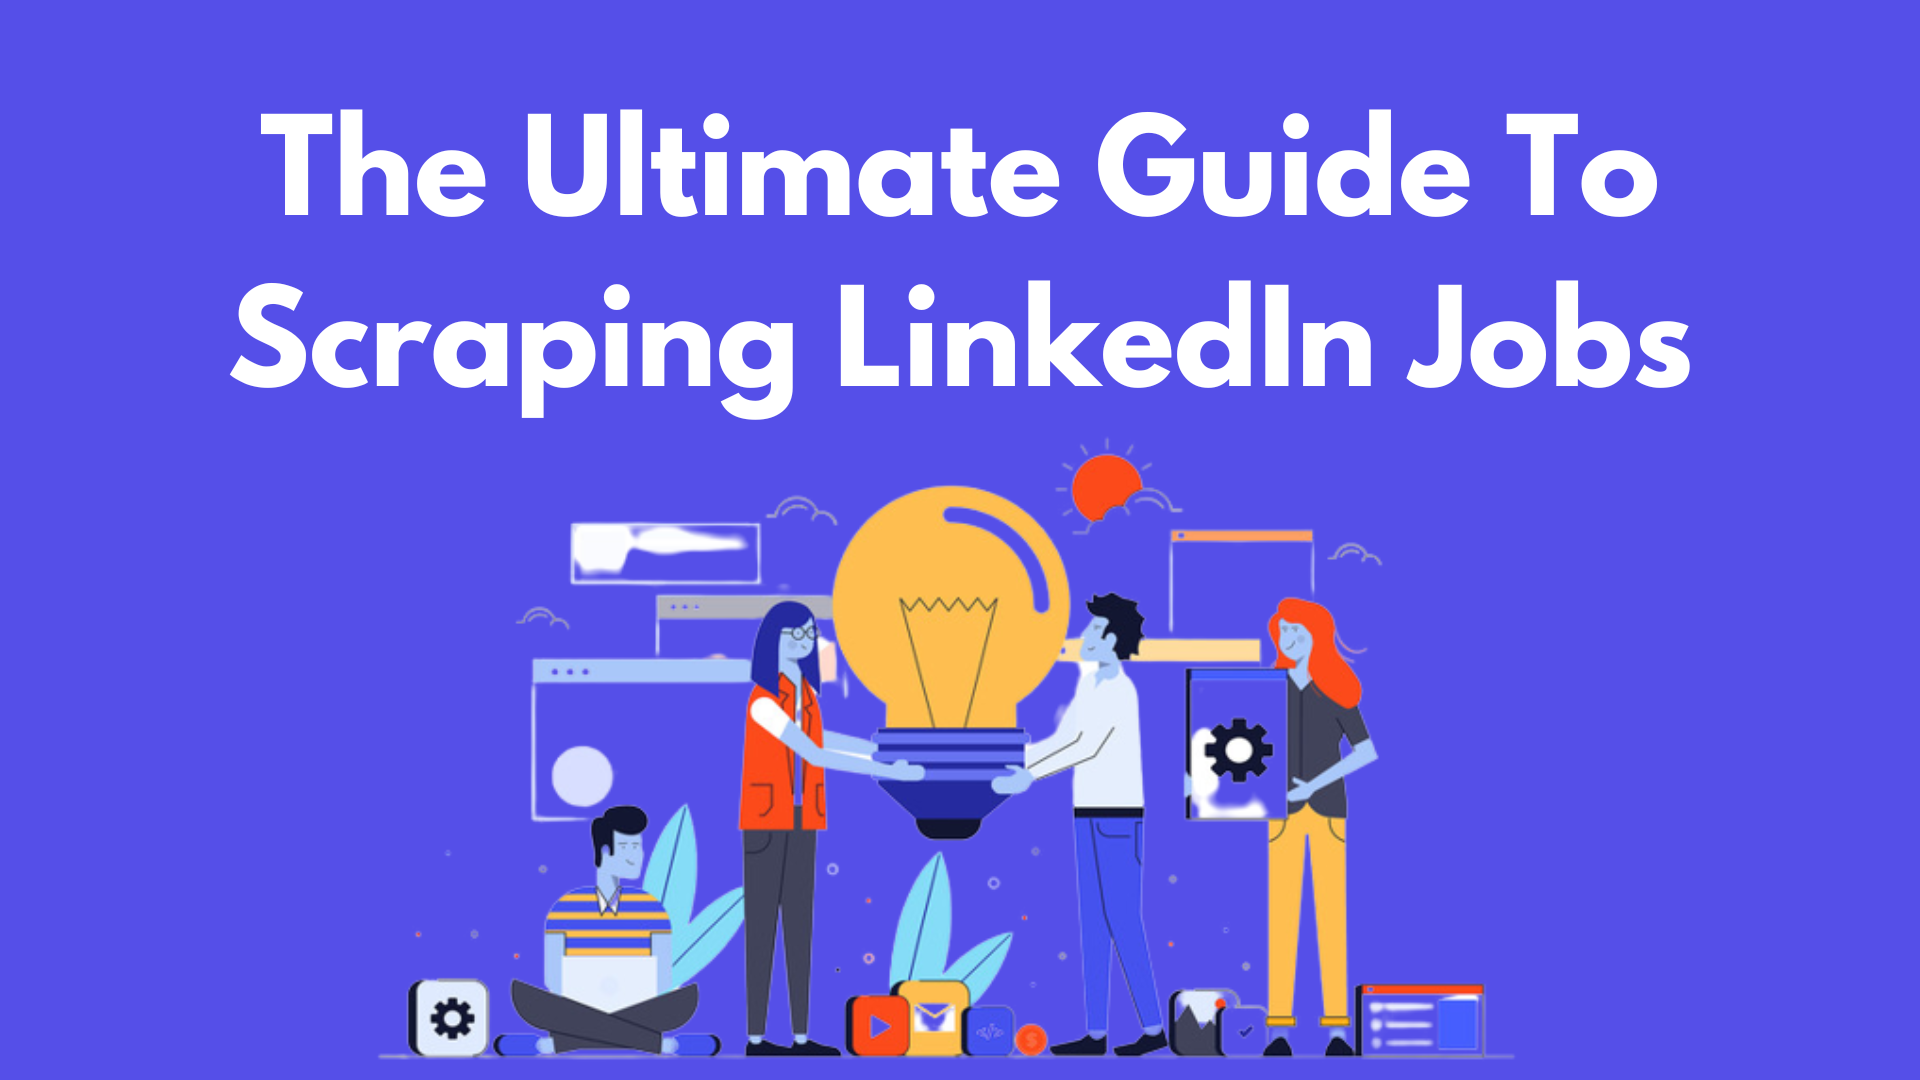 The Ultimate Guide To Scraping LinkedIn Jobs